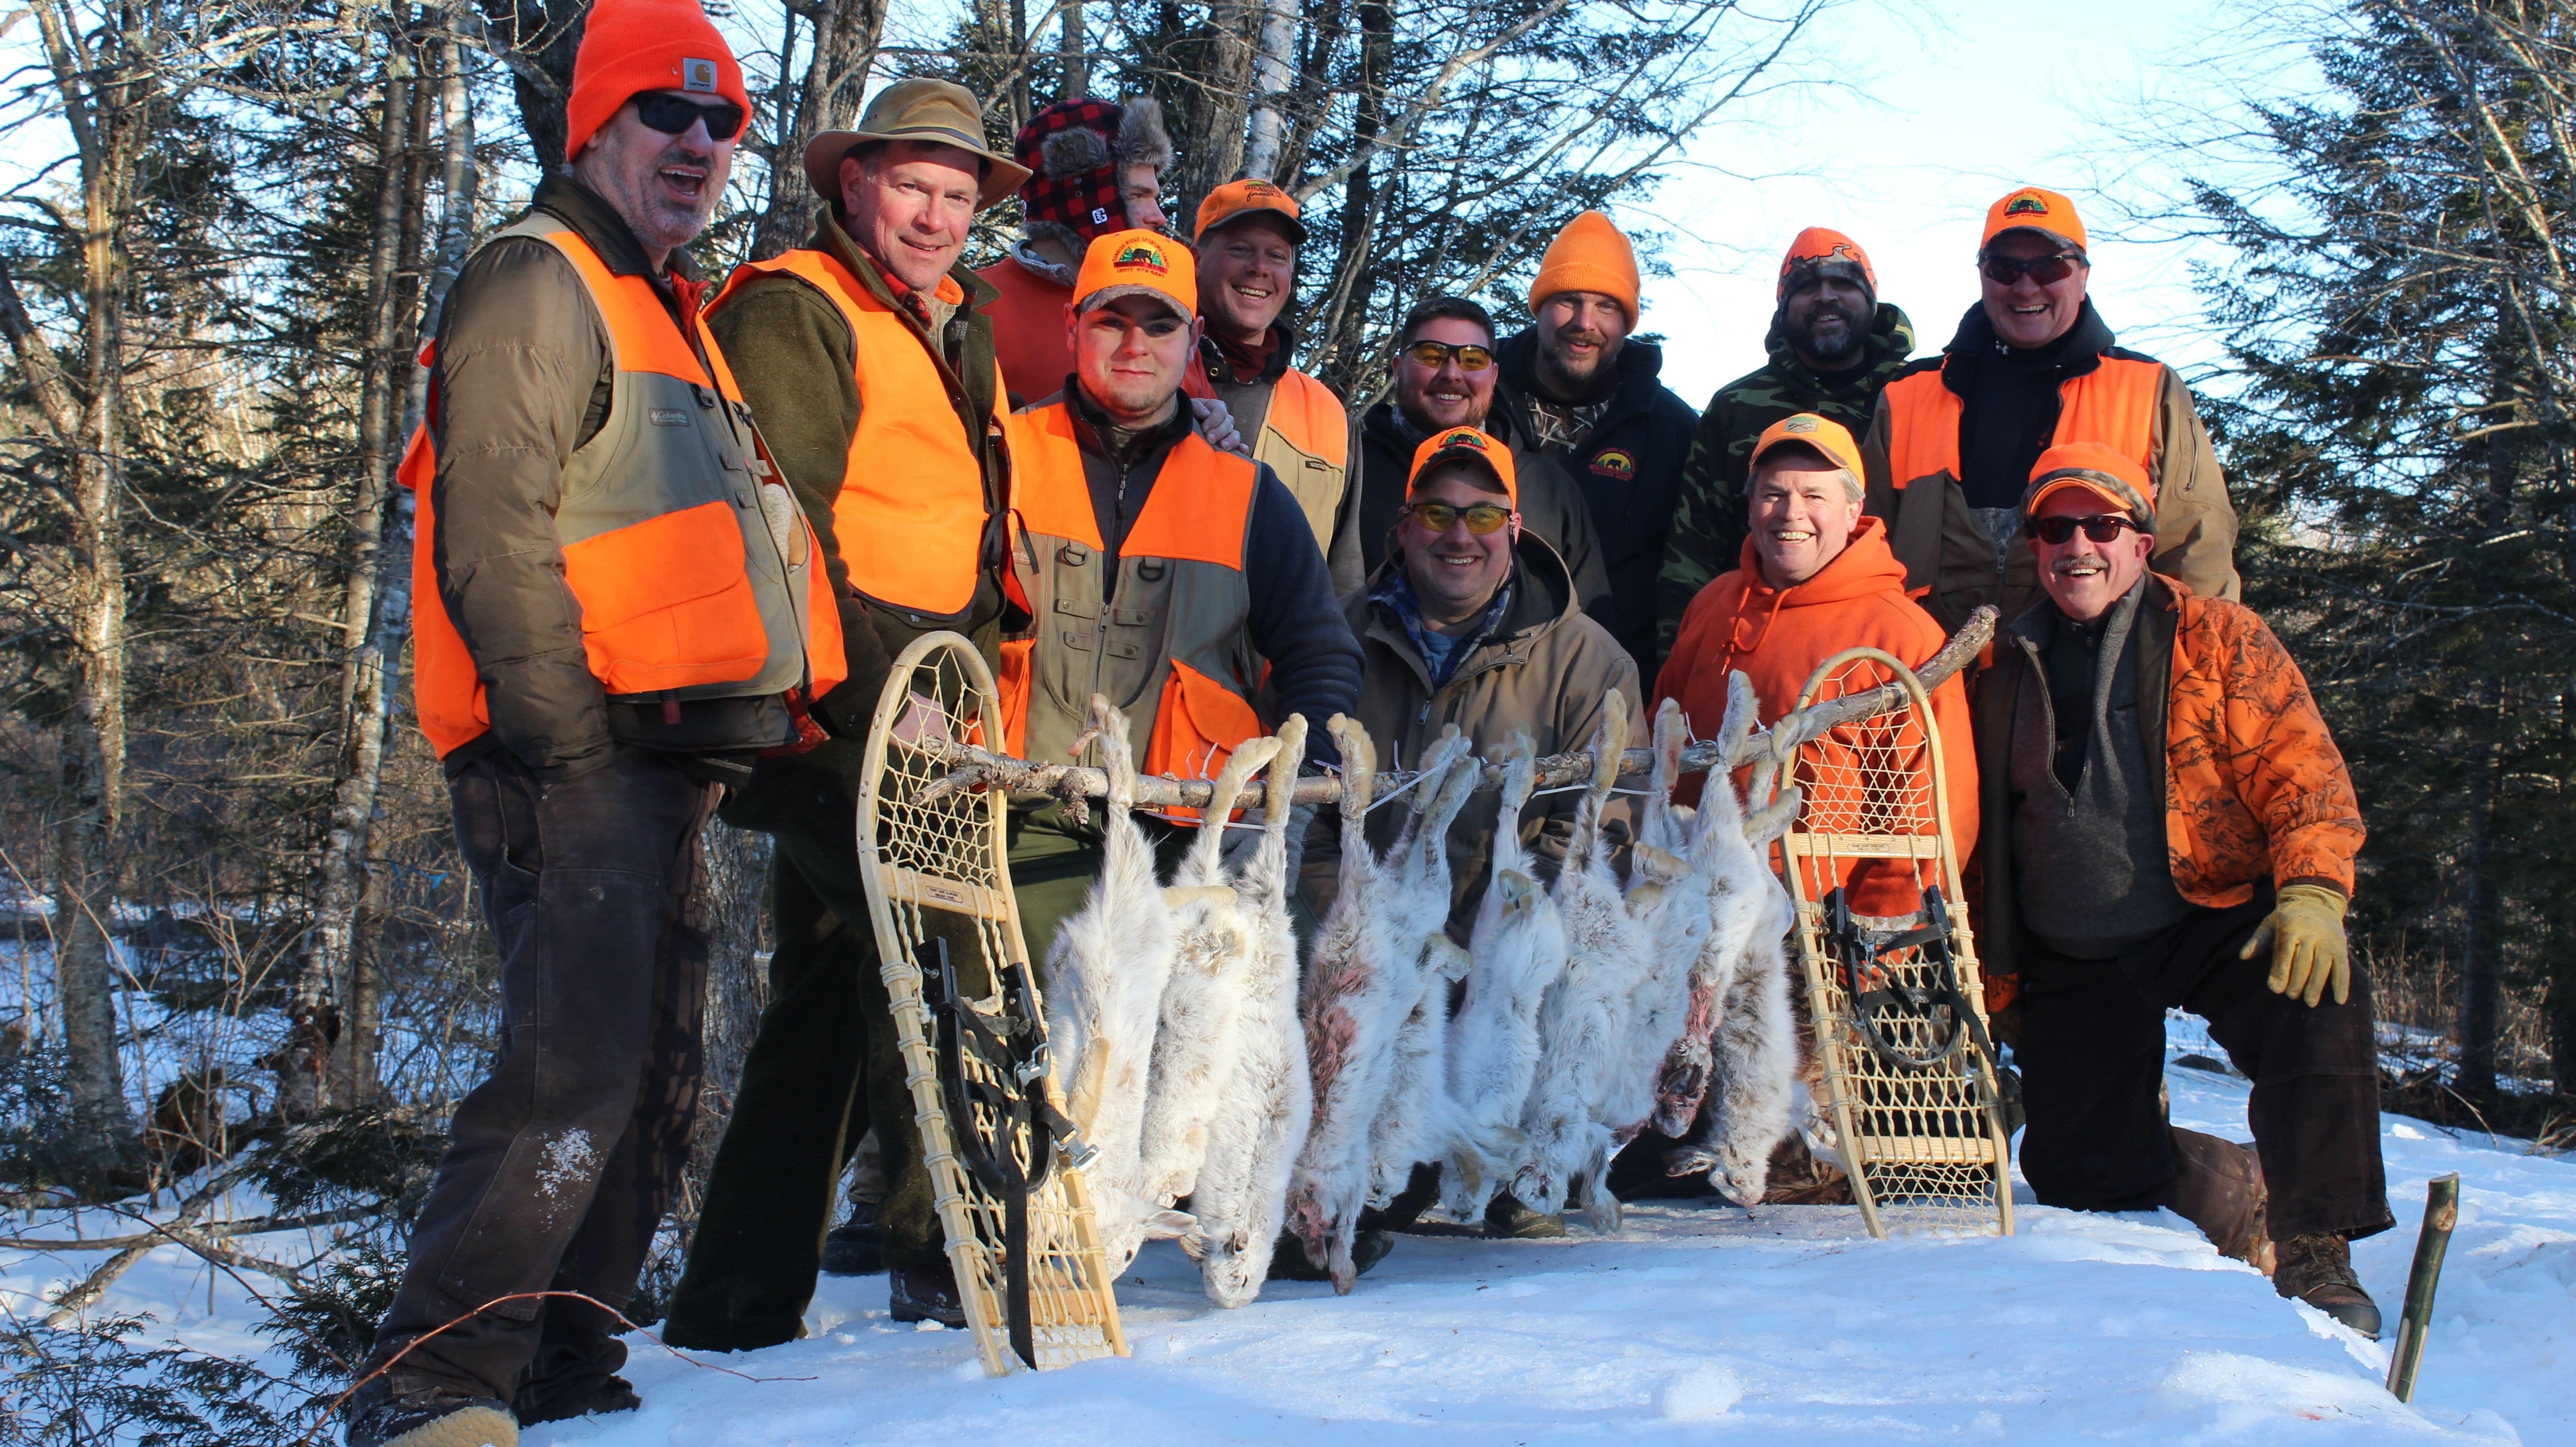 People Holding Hunted Down Snowshoe Hare